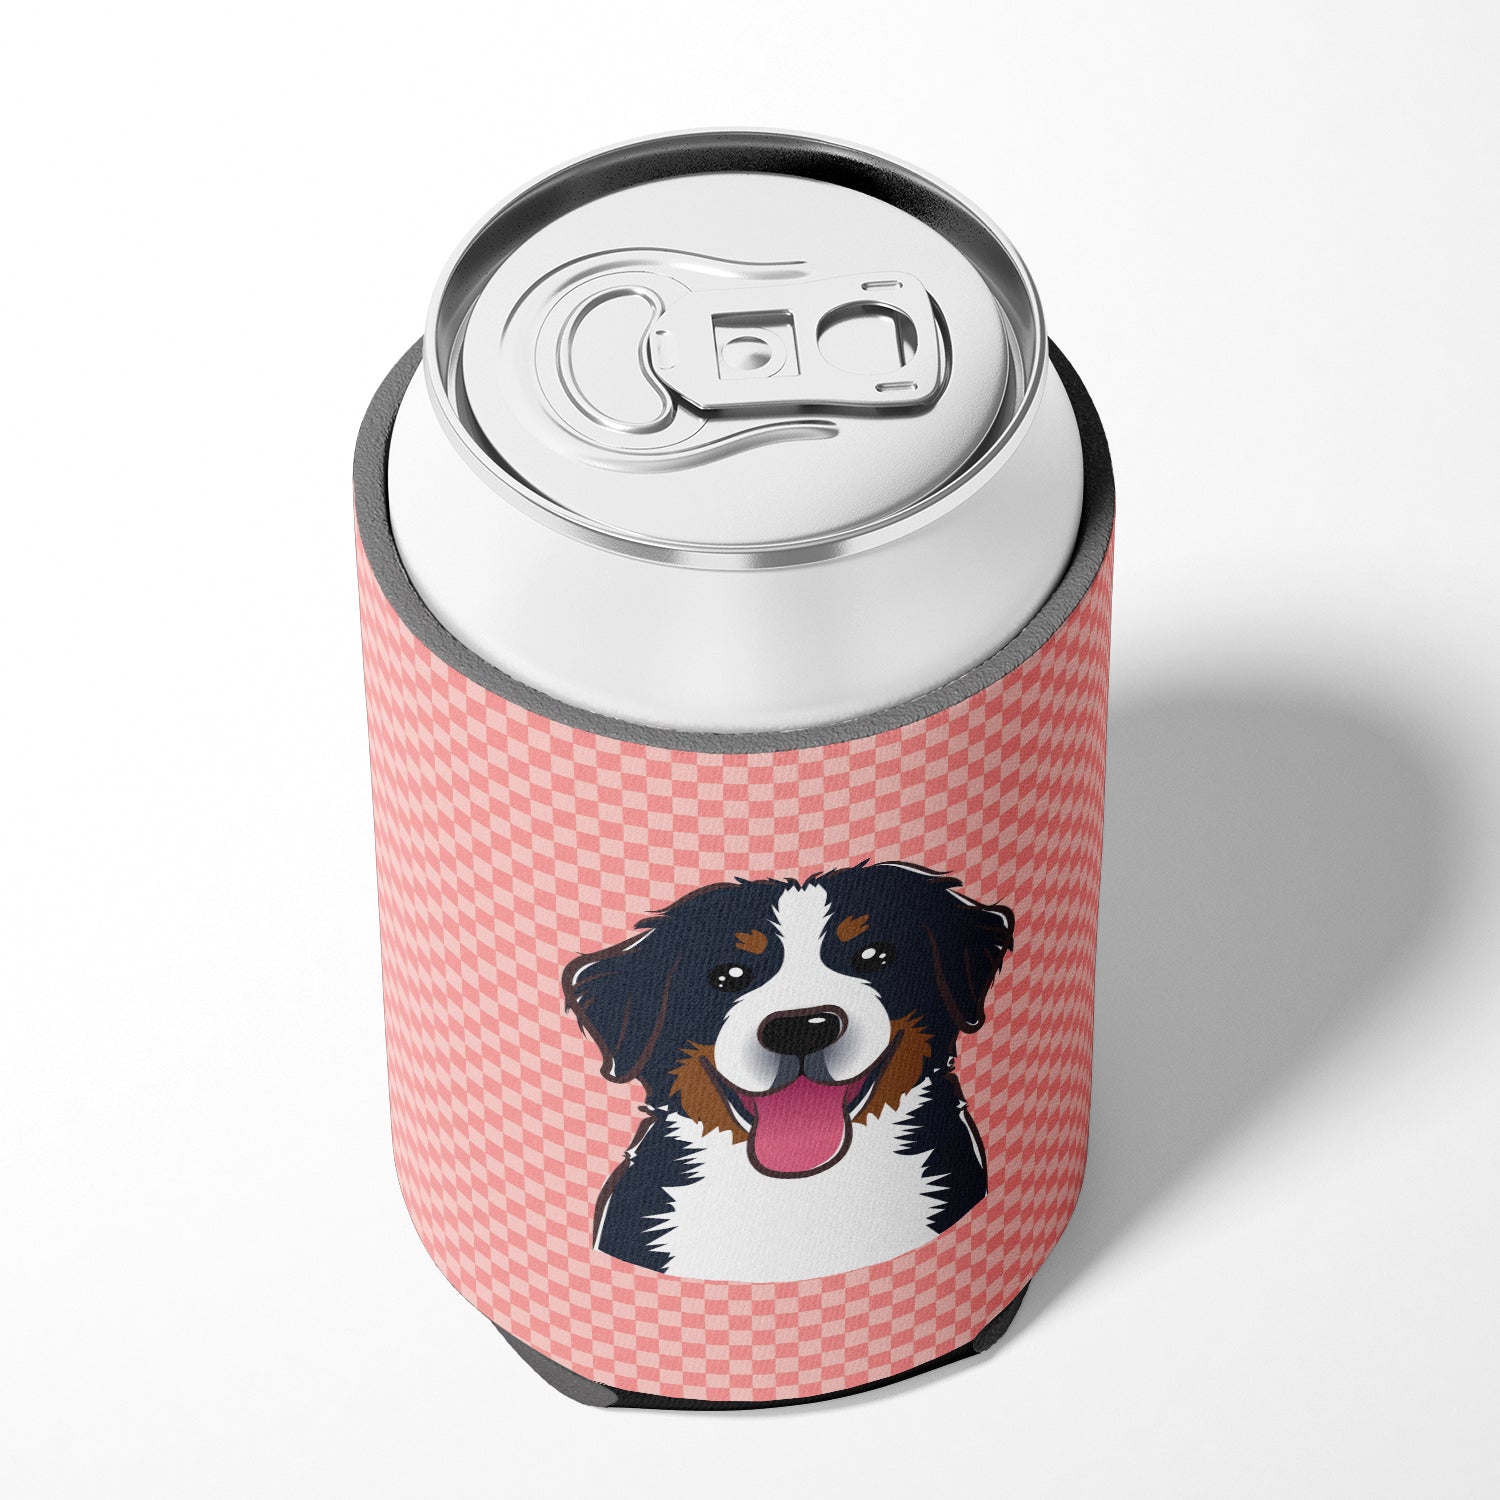 Checkerboard Pink Bernese Mountain Dog Can or Bottle Hugger BB1237CC.